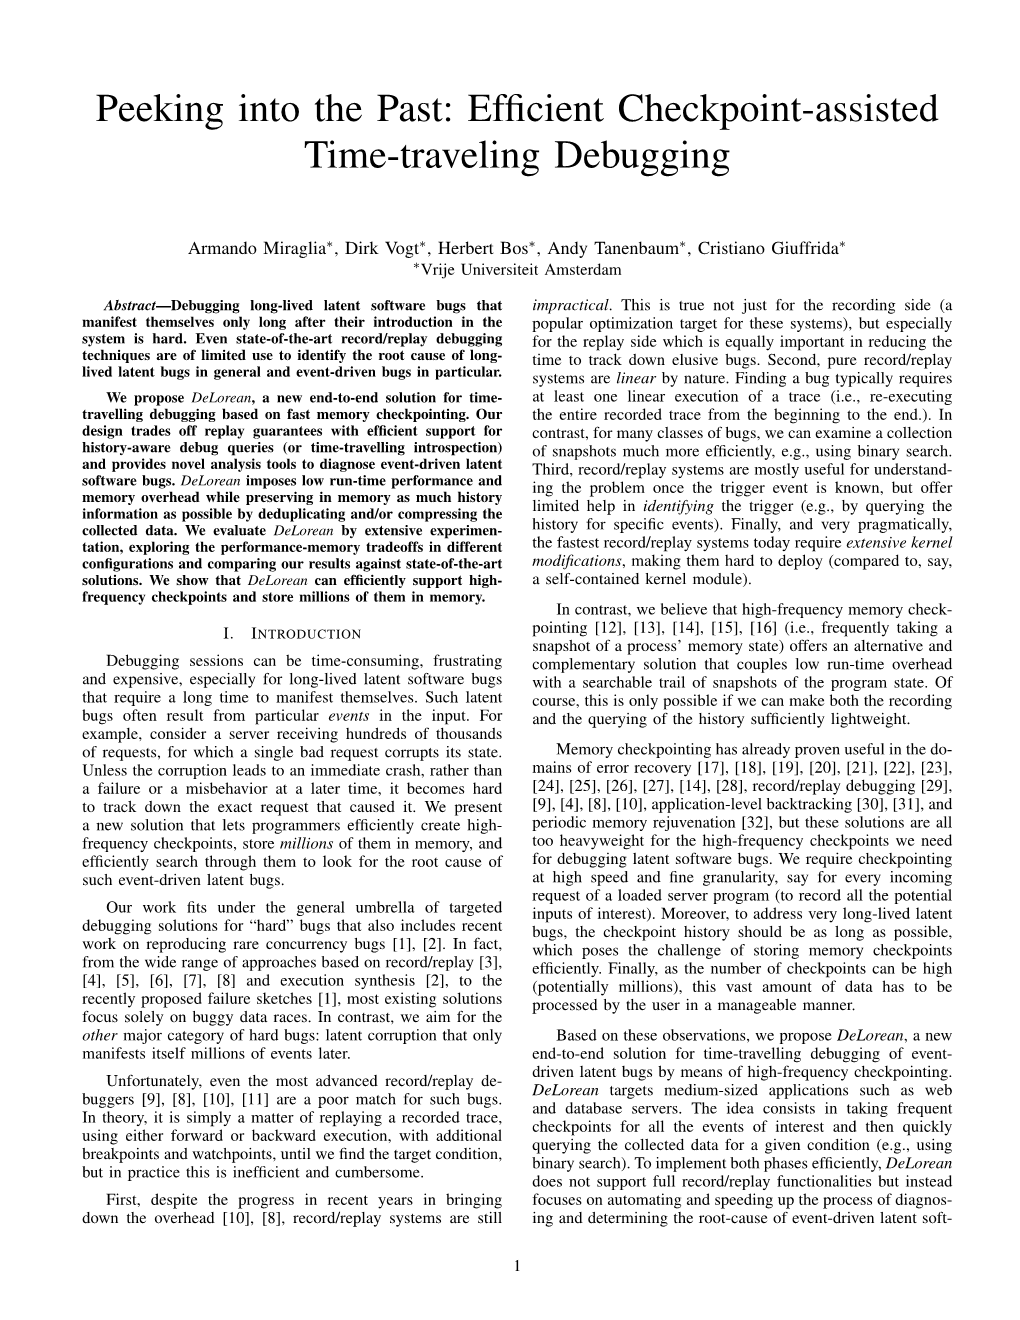 Efficient Checkpoint-Assisted Time-Traveling Debugging